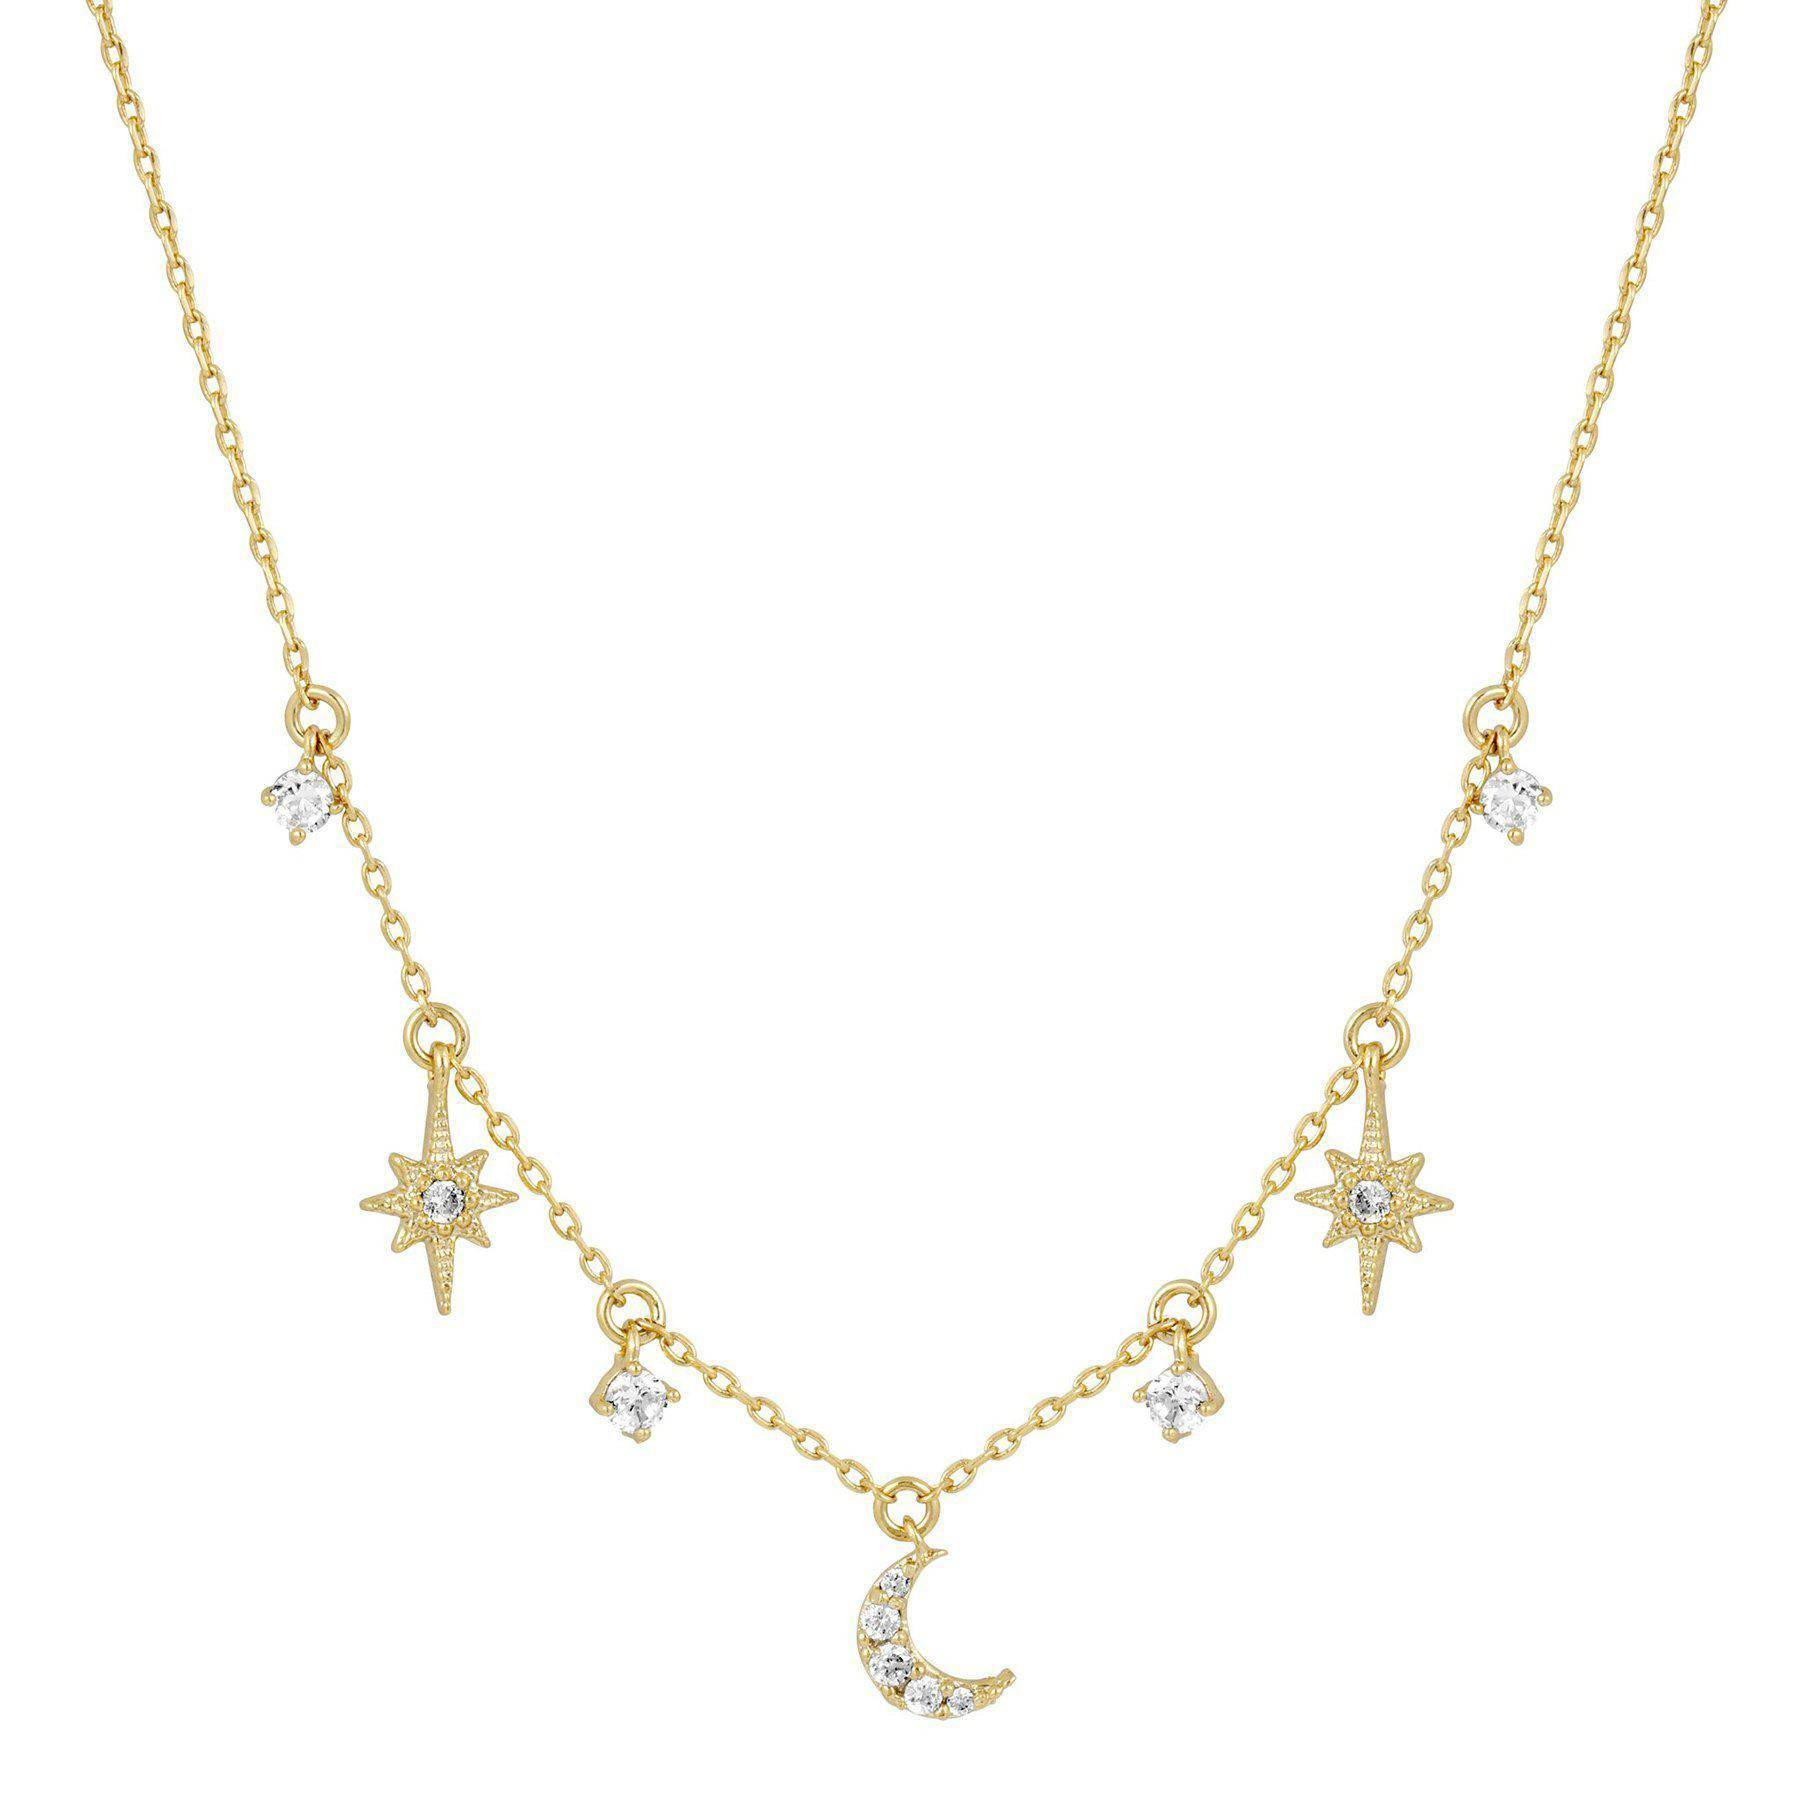 Supernova Charm Necklace - Gold - Twinkle Twinkle Little One